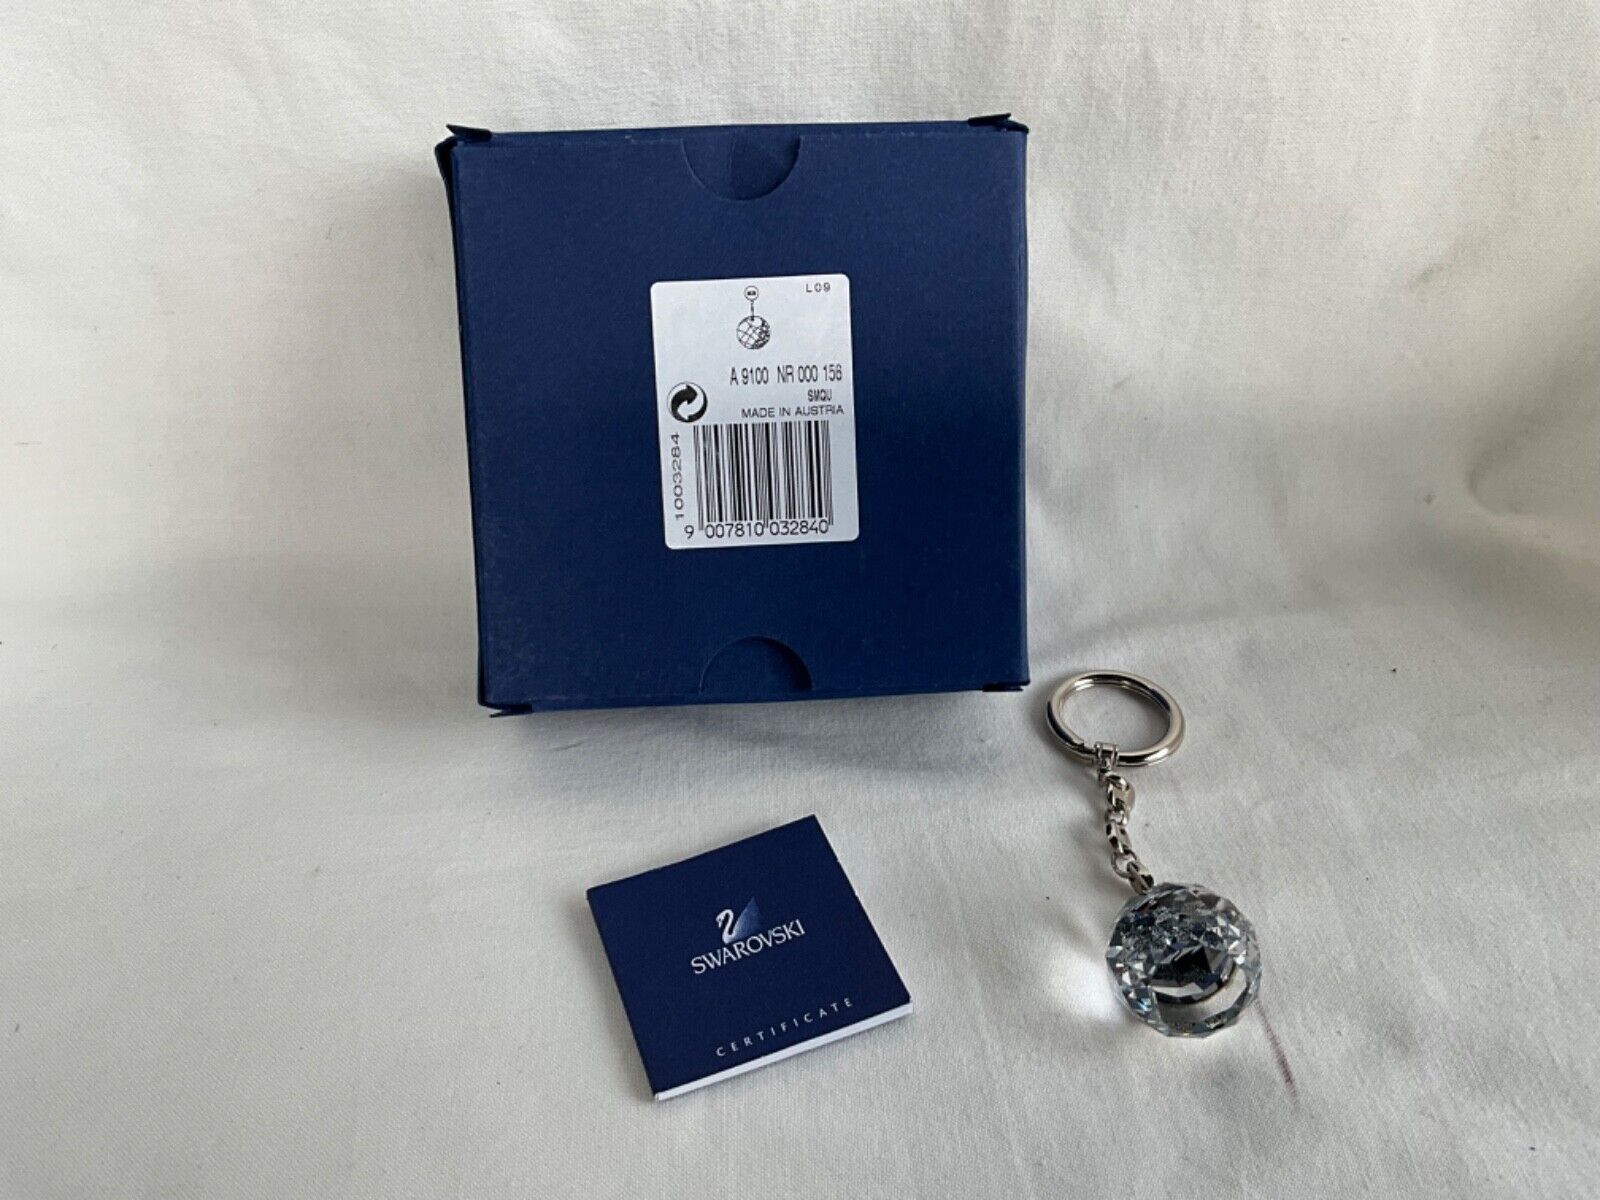 Swarovski Silver Crystal Key Chain  25 Years Facetted Round Crystal Silver Chain